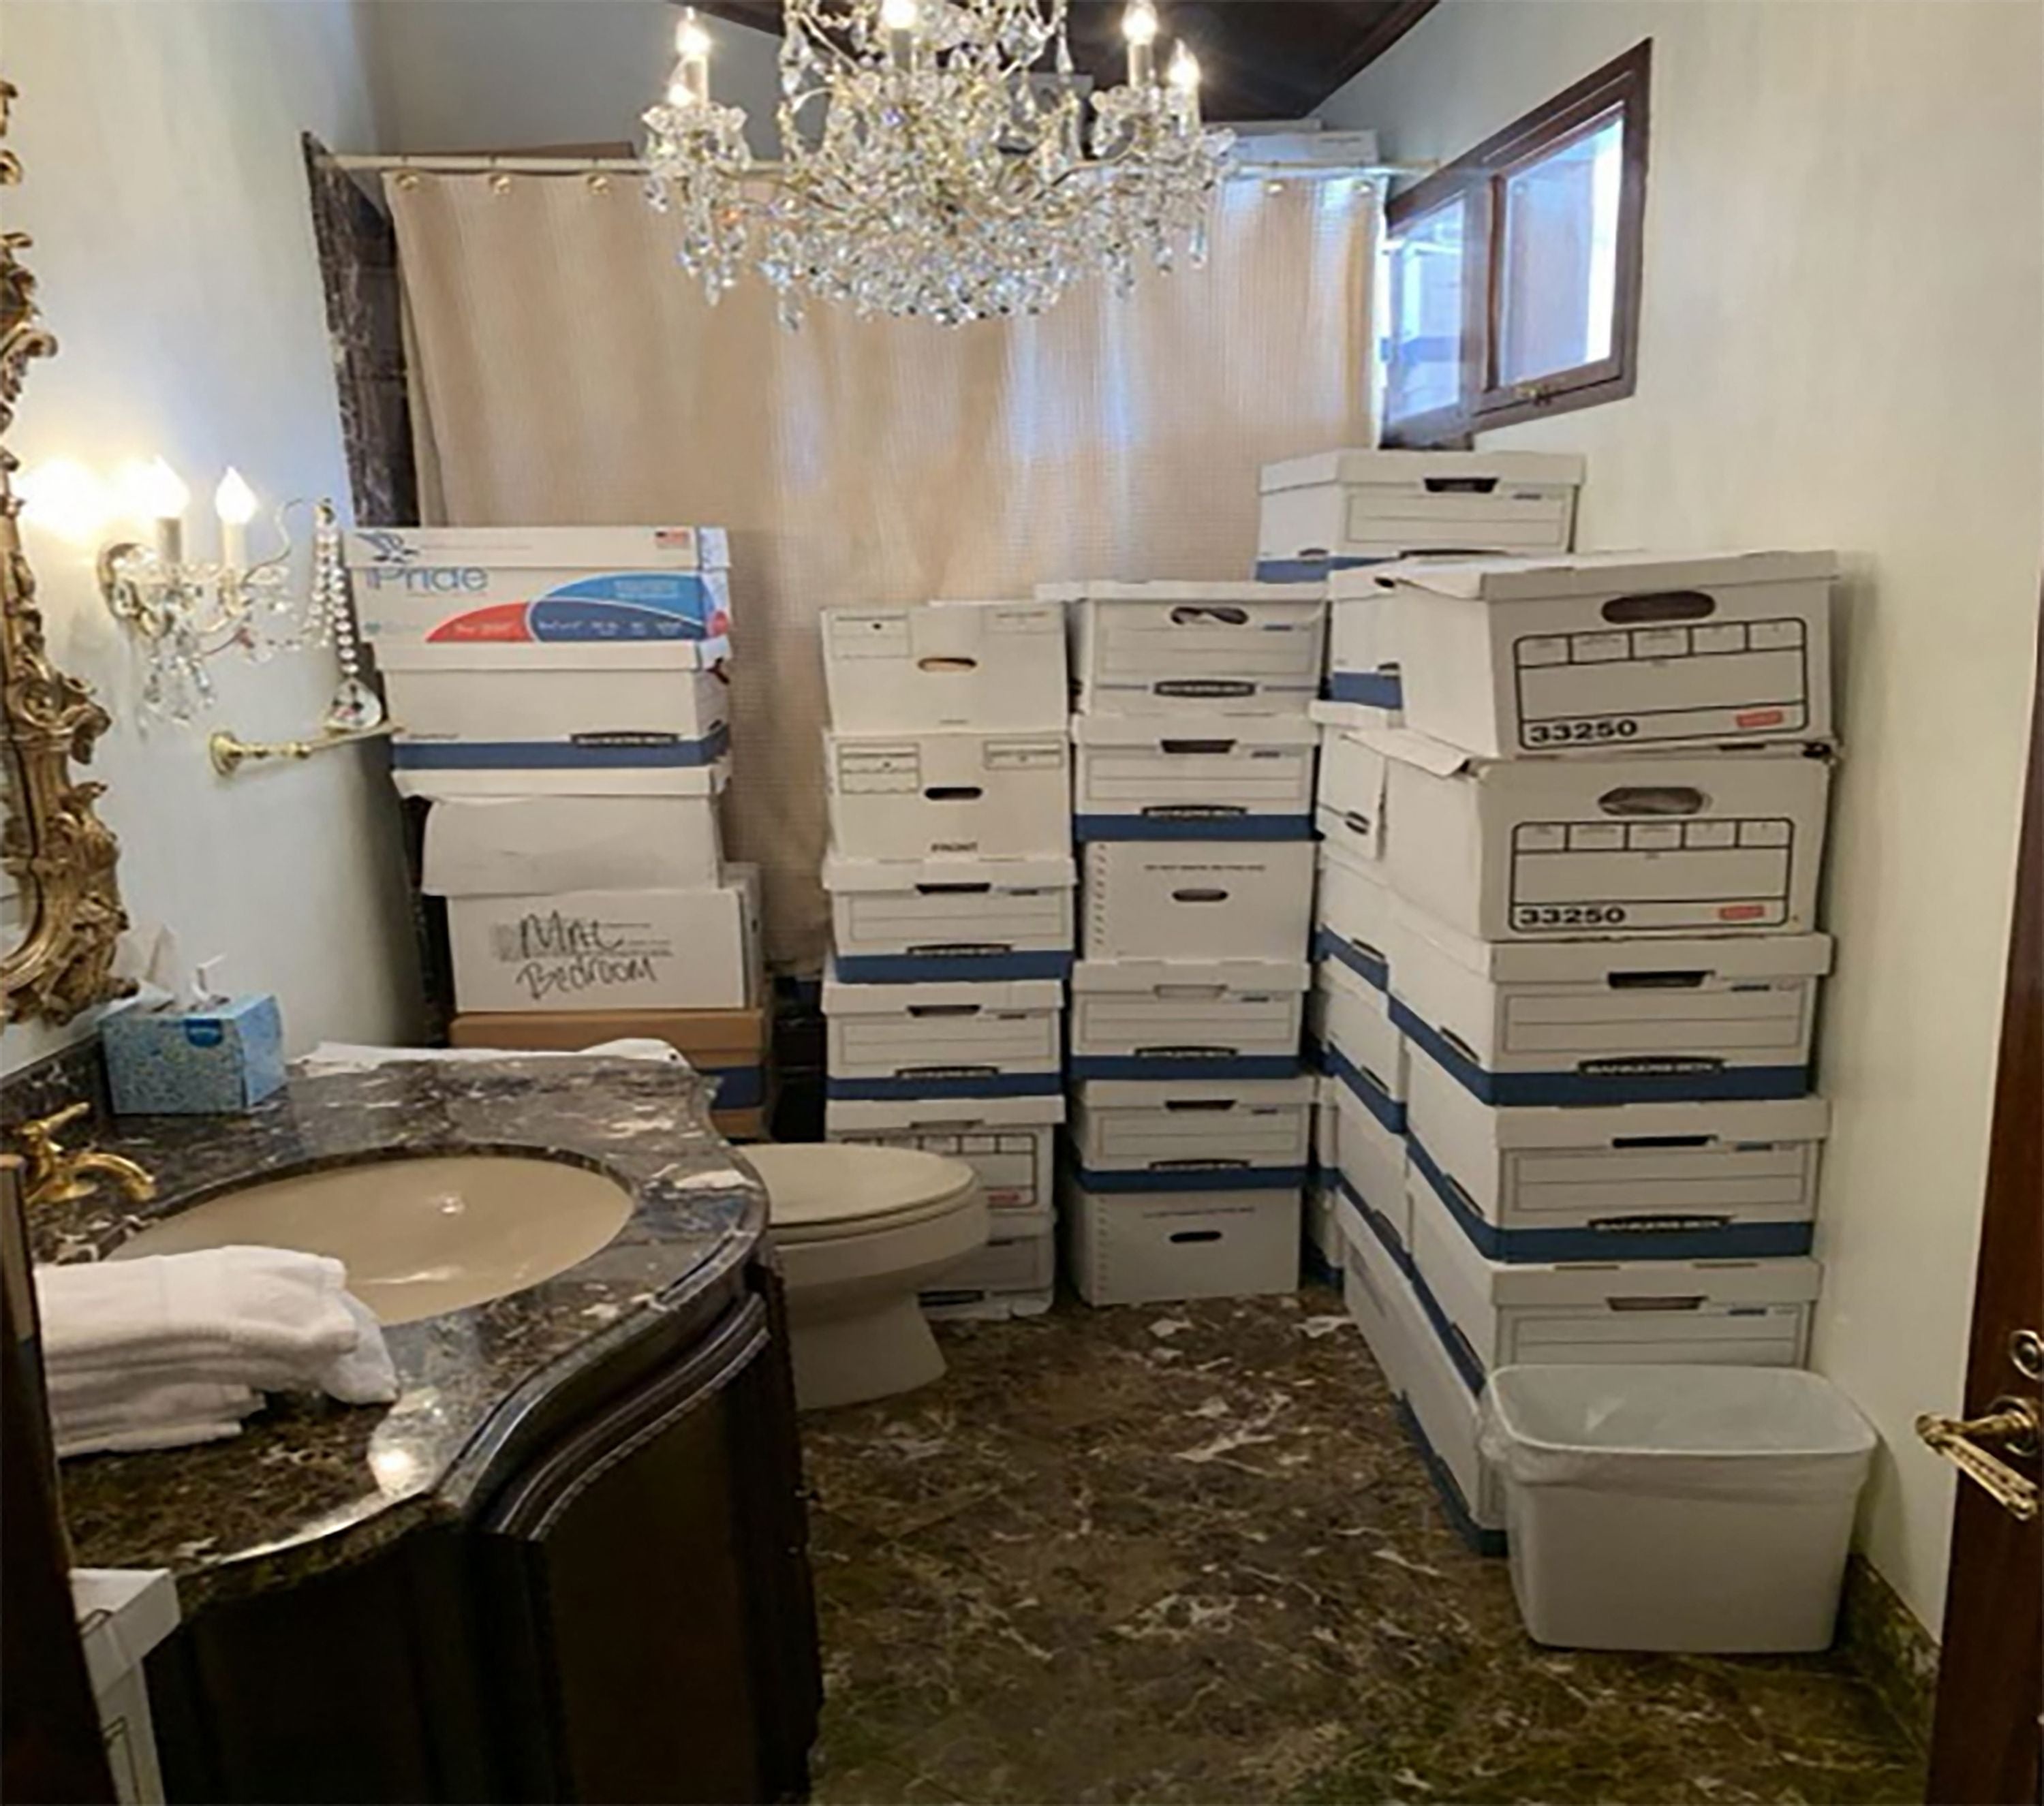 In this handout photo provided by the US Department of Justice, stacks of boxes can be observed in a bathroom and shower in The Mar-a-Lago Club’s Lake Room at former US President Donald Trump’s Mar-a-Lago estate in Palm Beach, Florida